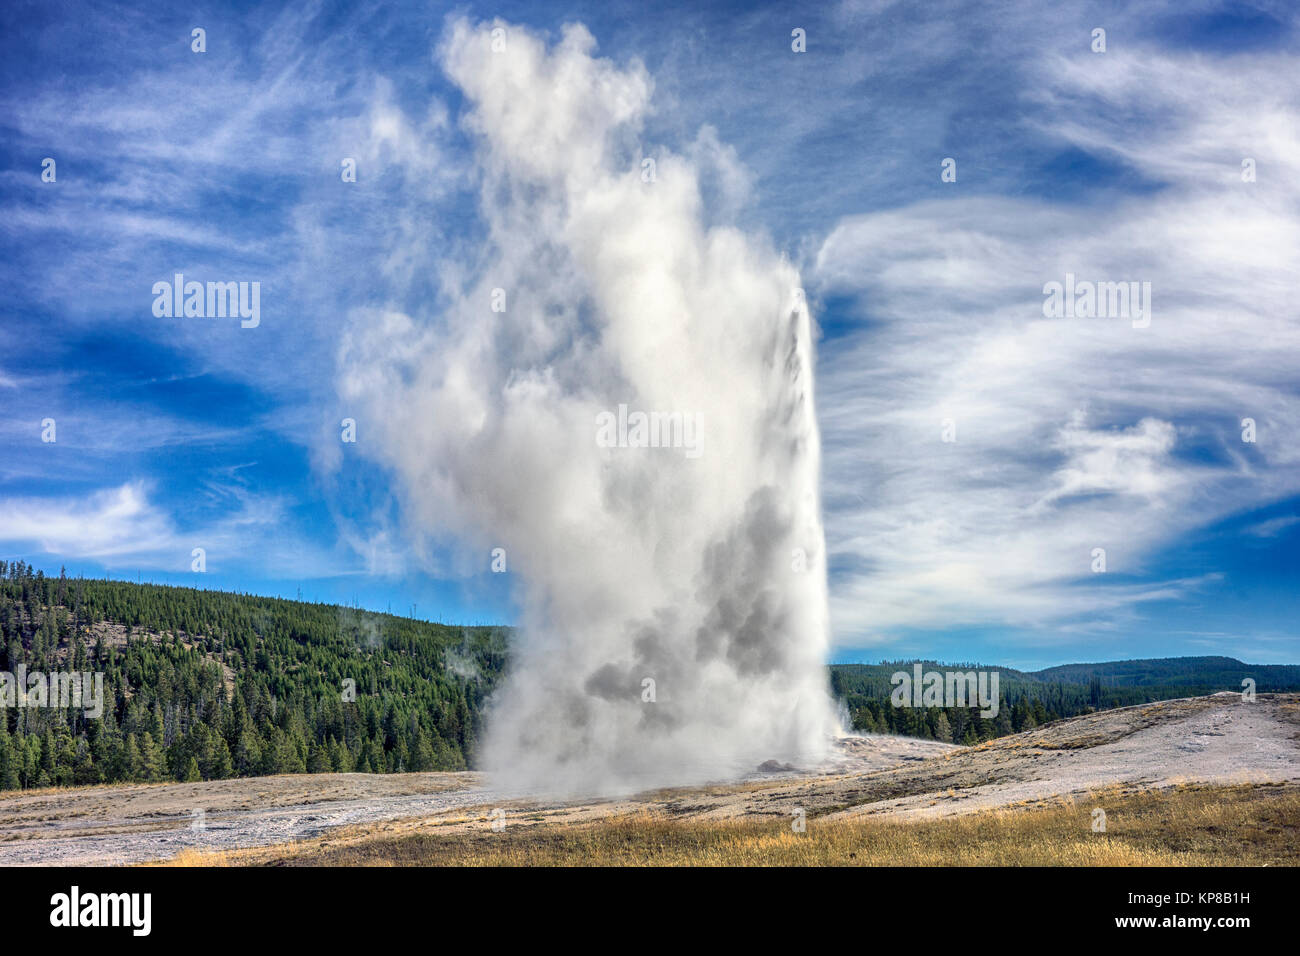 Yellowstone National Park, Wyoming, USA. Old Faithful Geyser, it erupts on a regular, approximately hourly cycle. Height 106-185 feet, 32-56 metres. Stock Photo